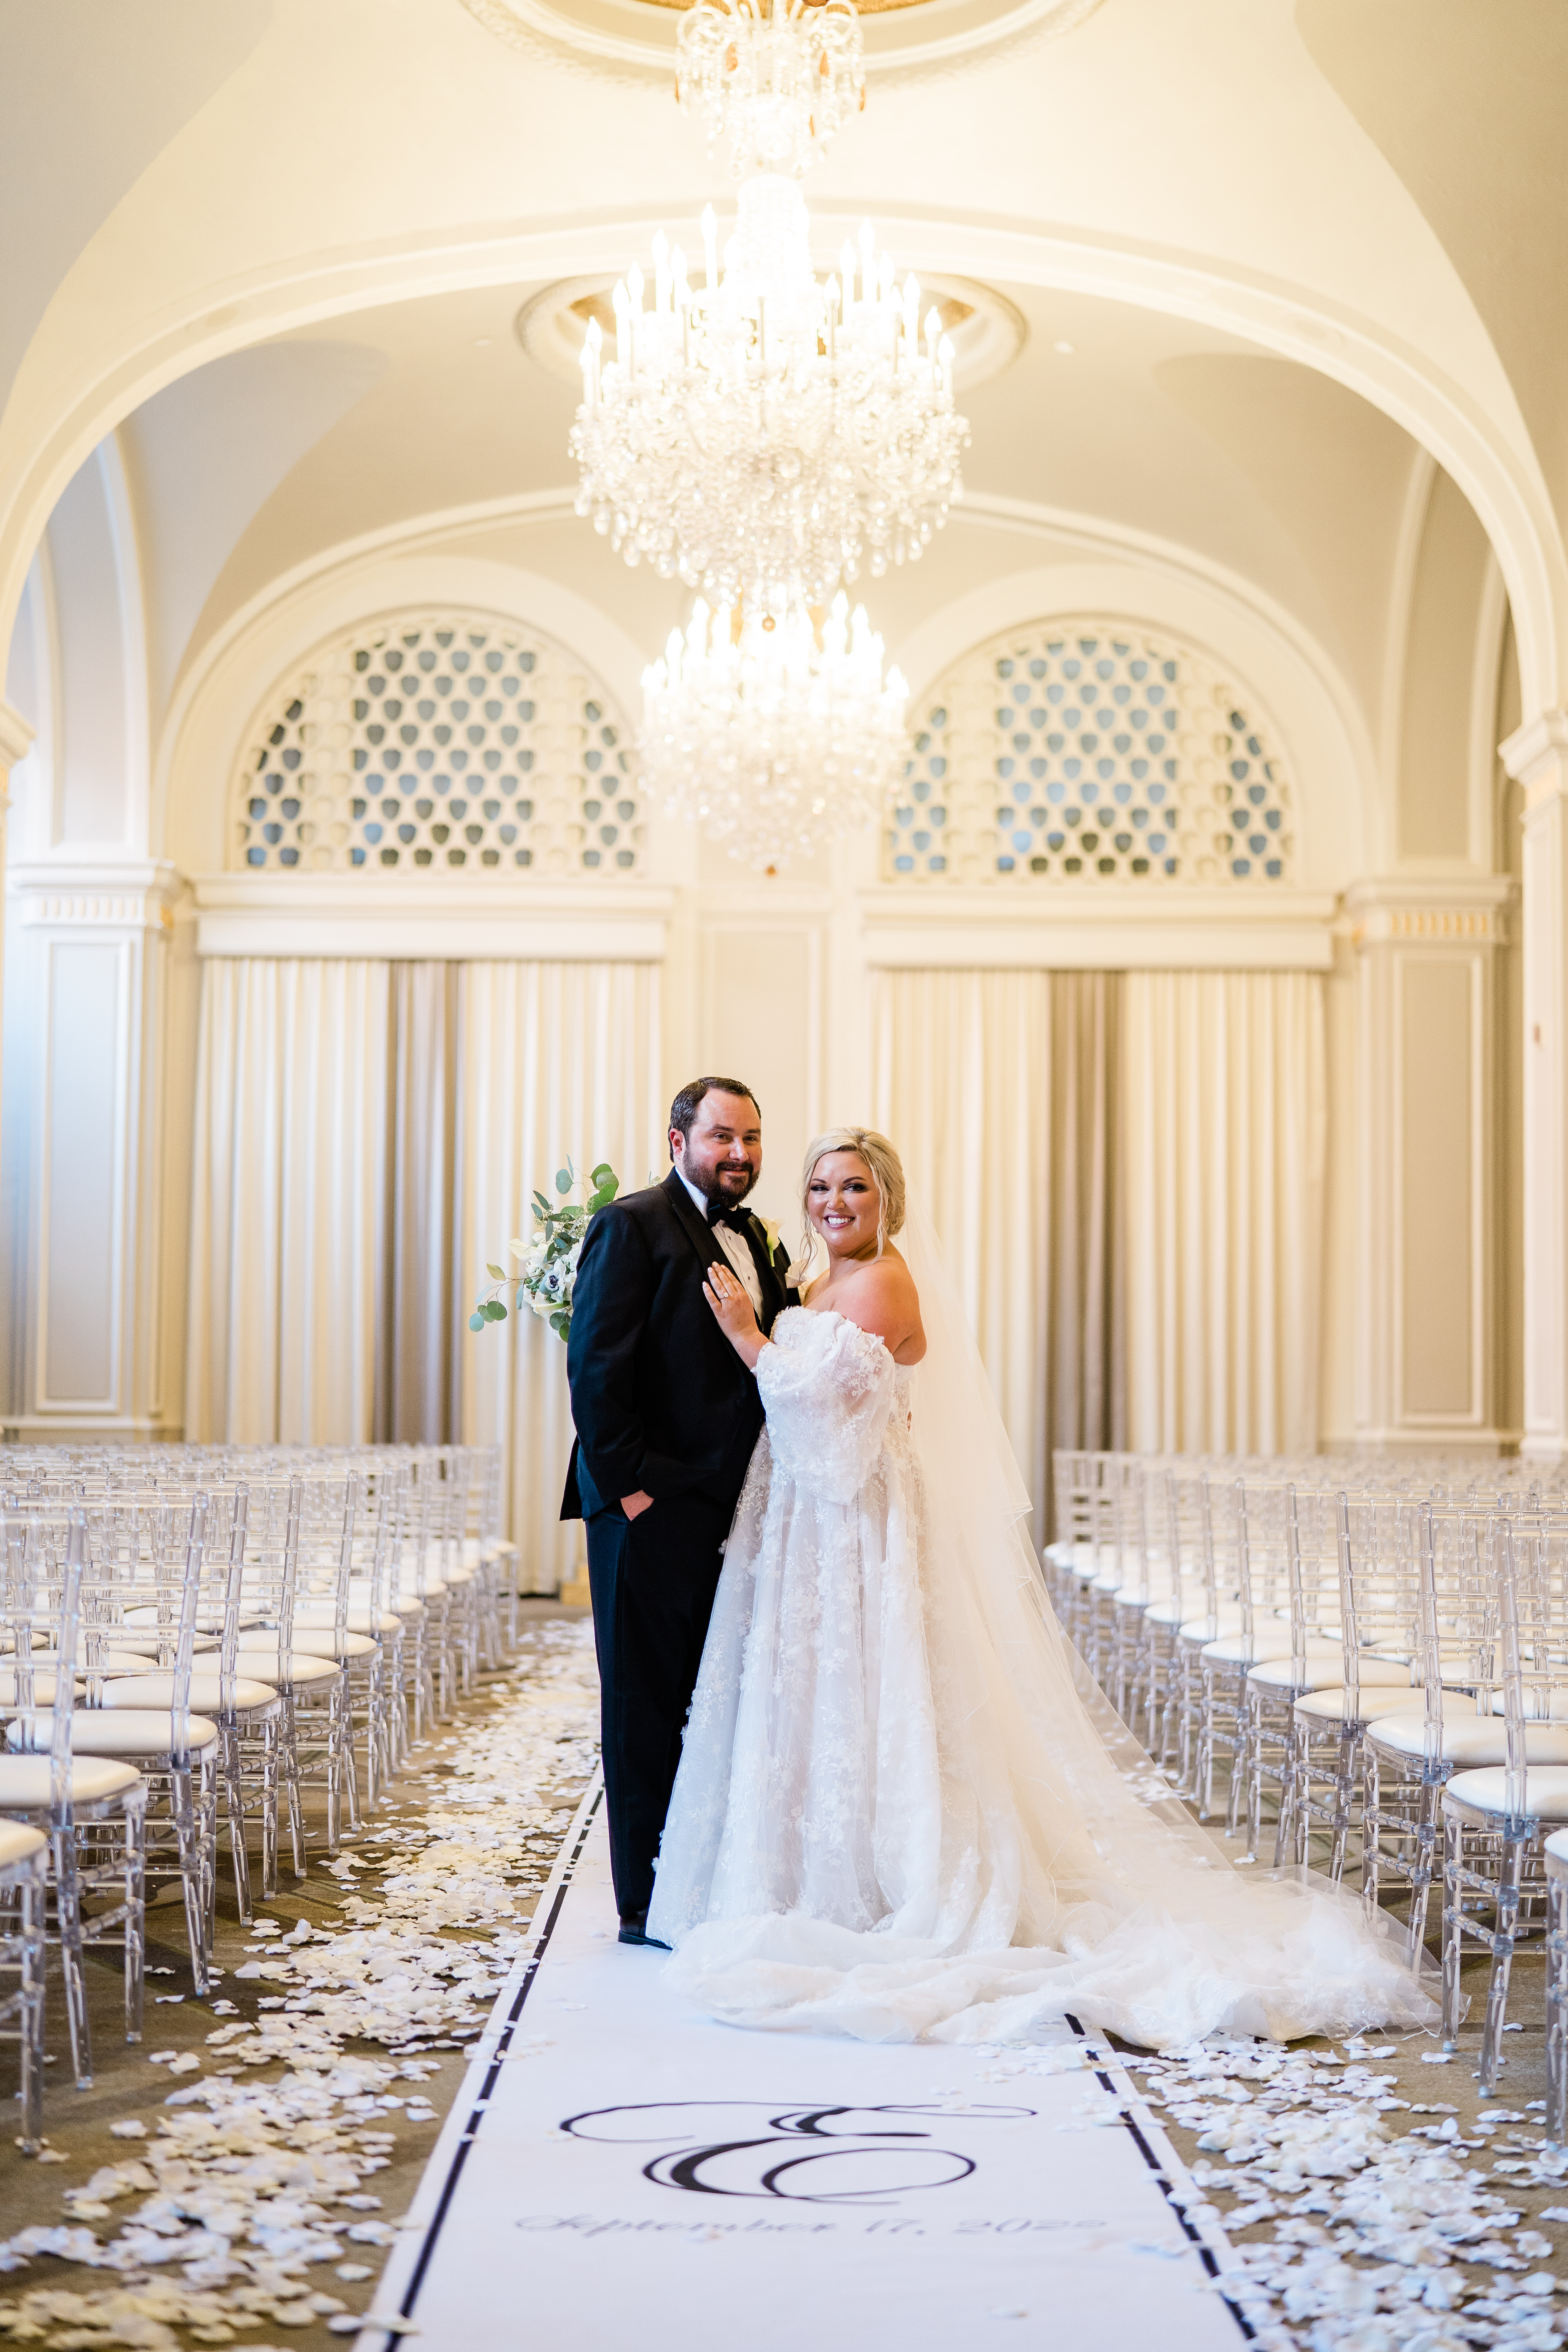 bride and groom standing in an elegant ceremony hall with chandeliers overhead